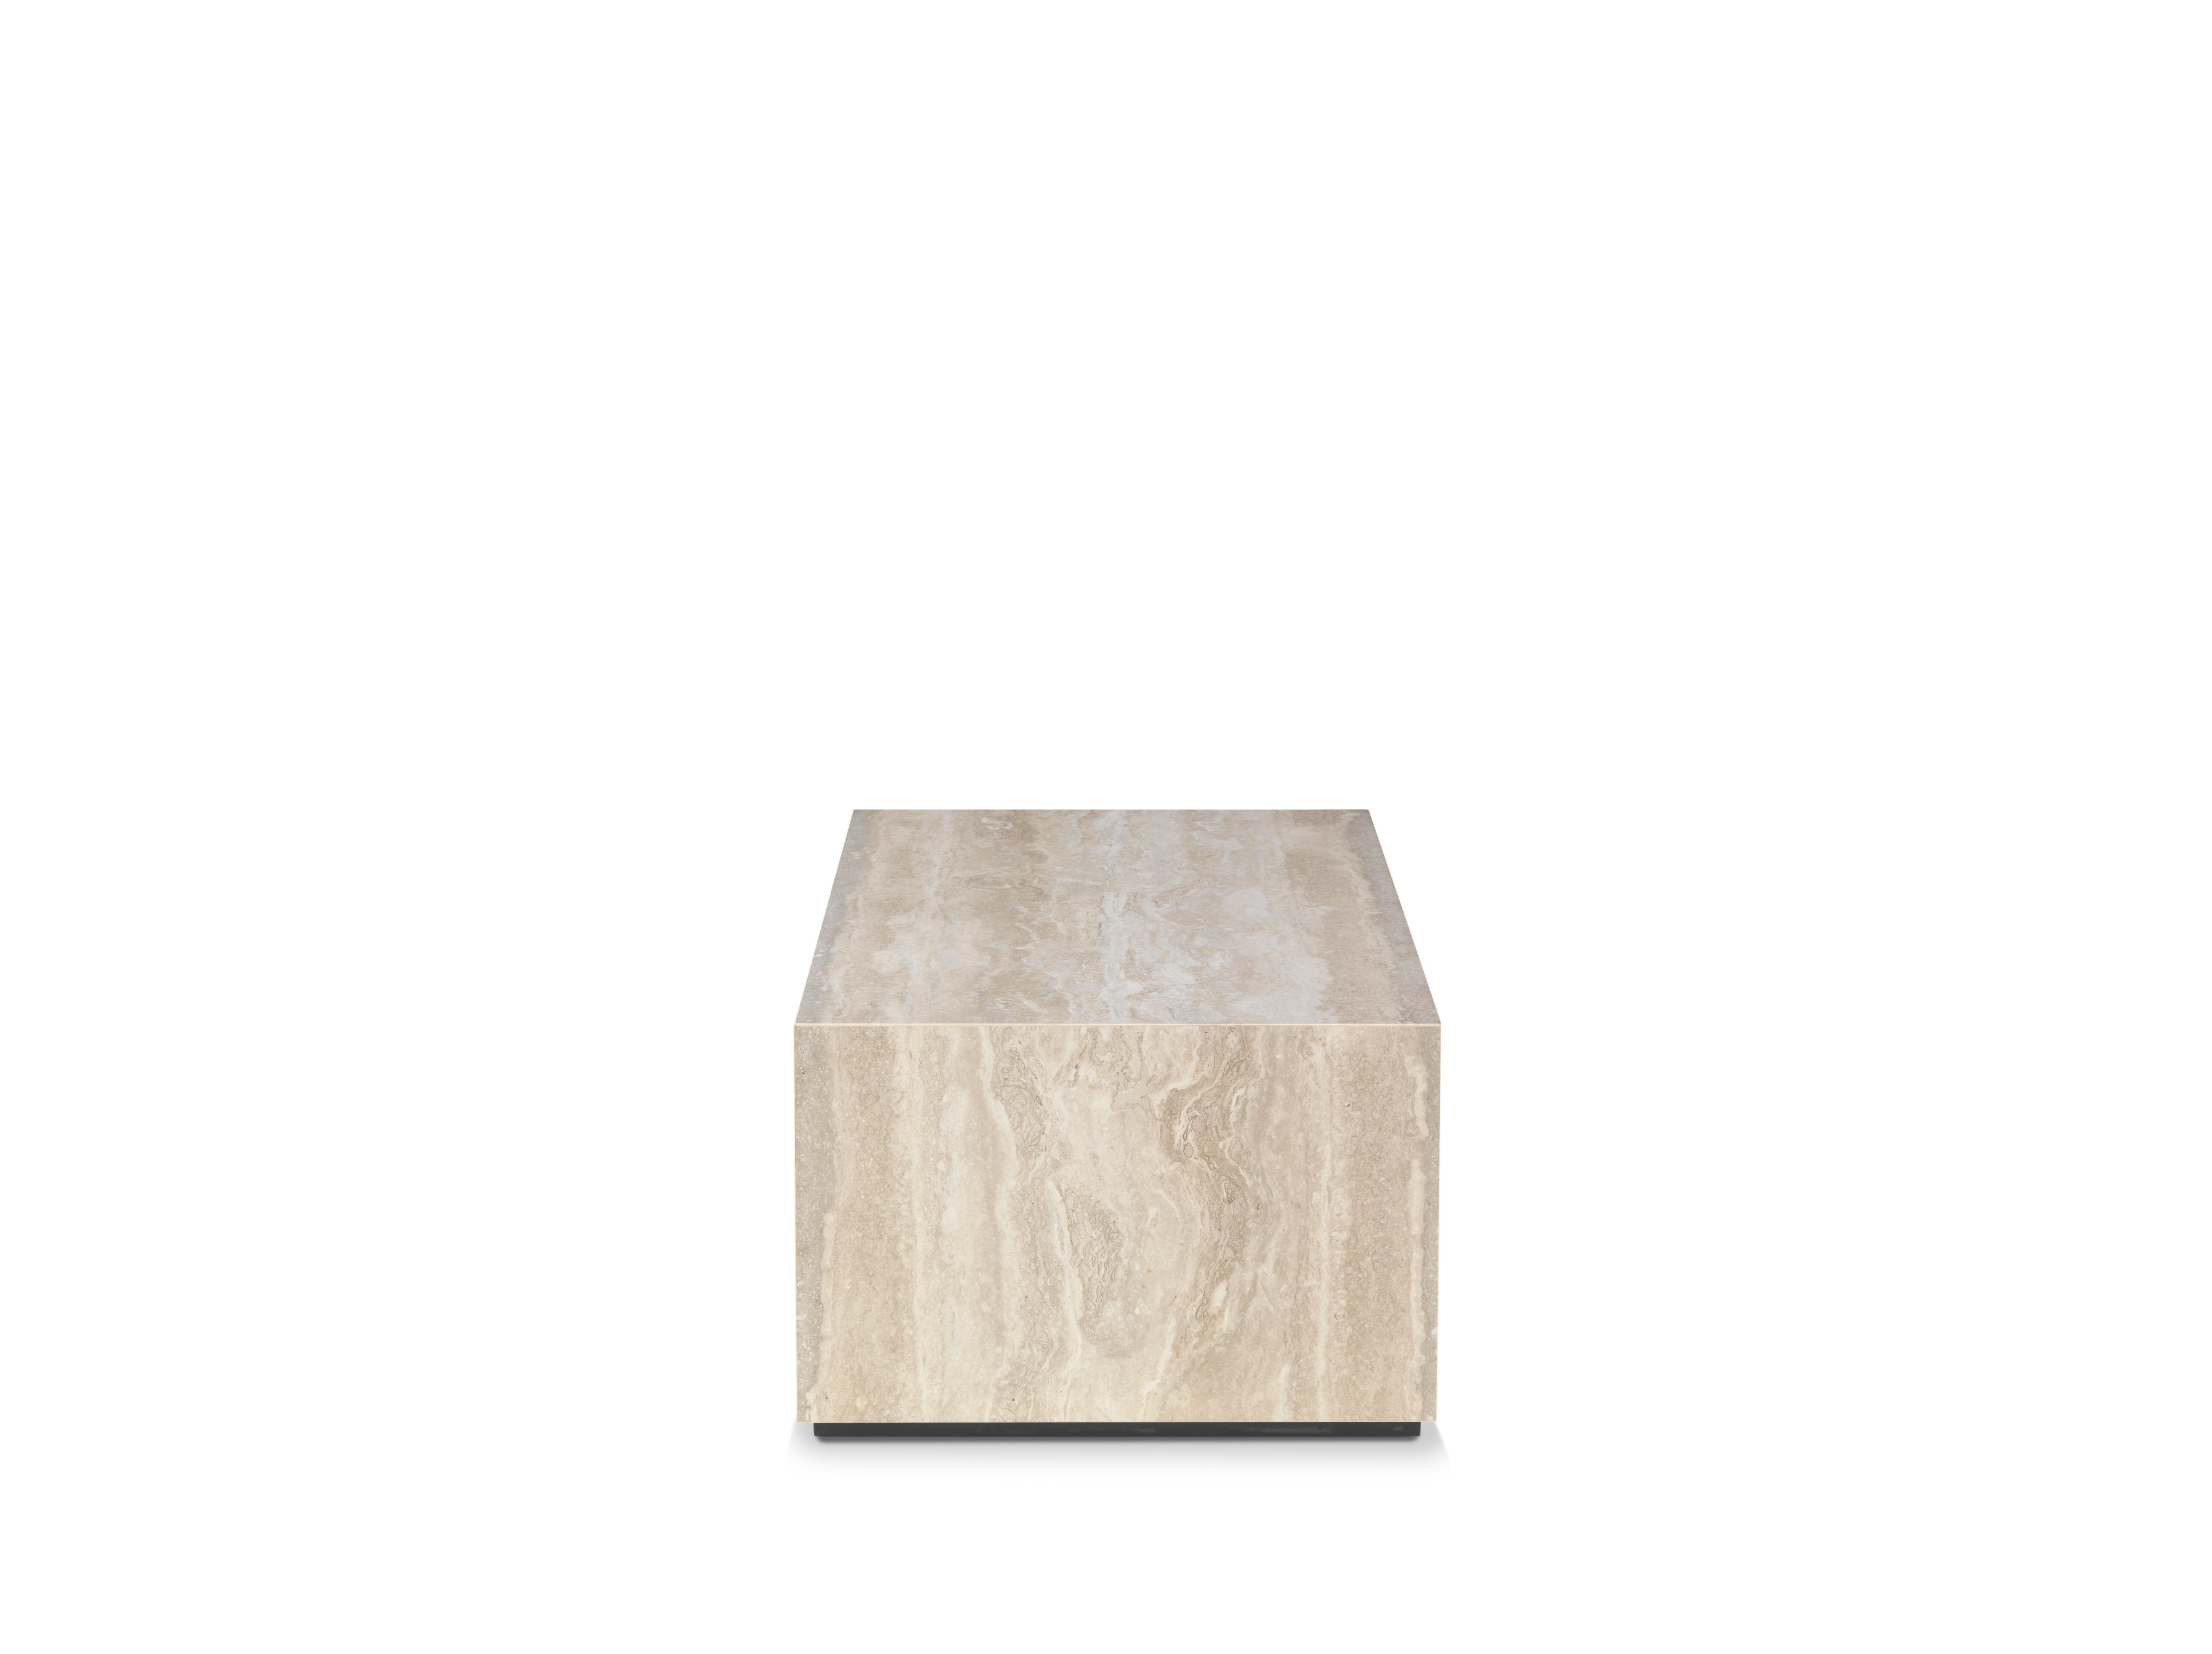 Assembled at 45 degrees, the travertine table Flair, with its geometric lines, it's a refined complement able to add a contemporary appeal to any environment.
Flair side table with structure in wood covered in porcelain stoneware, Travertino